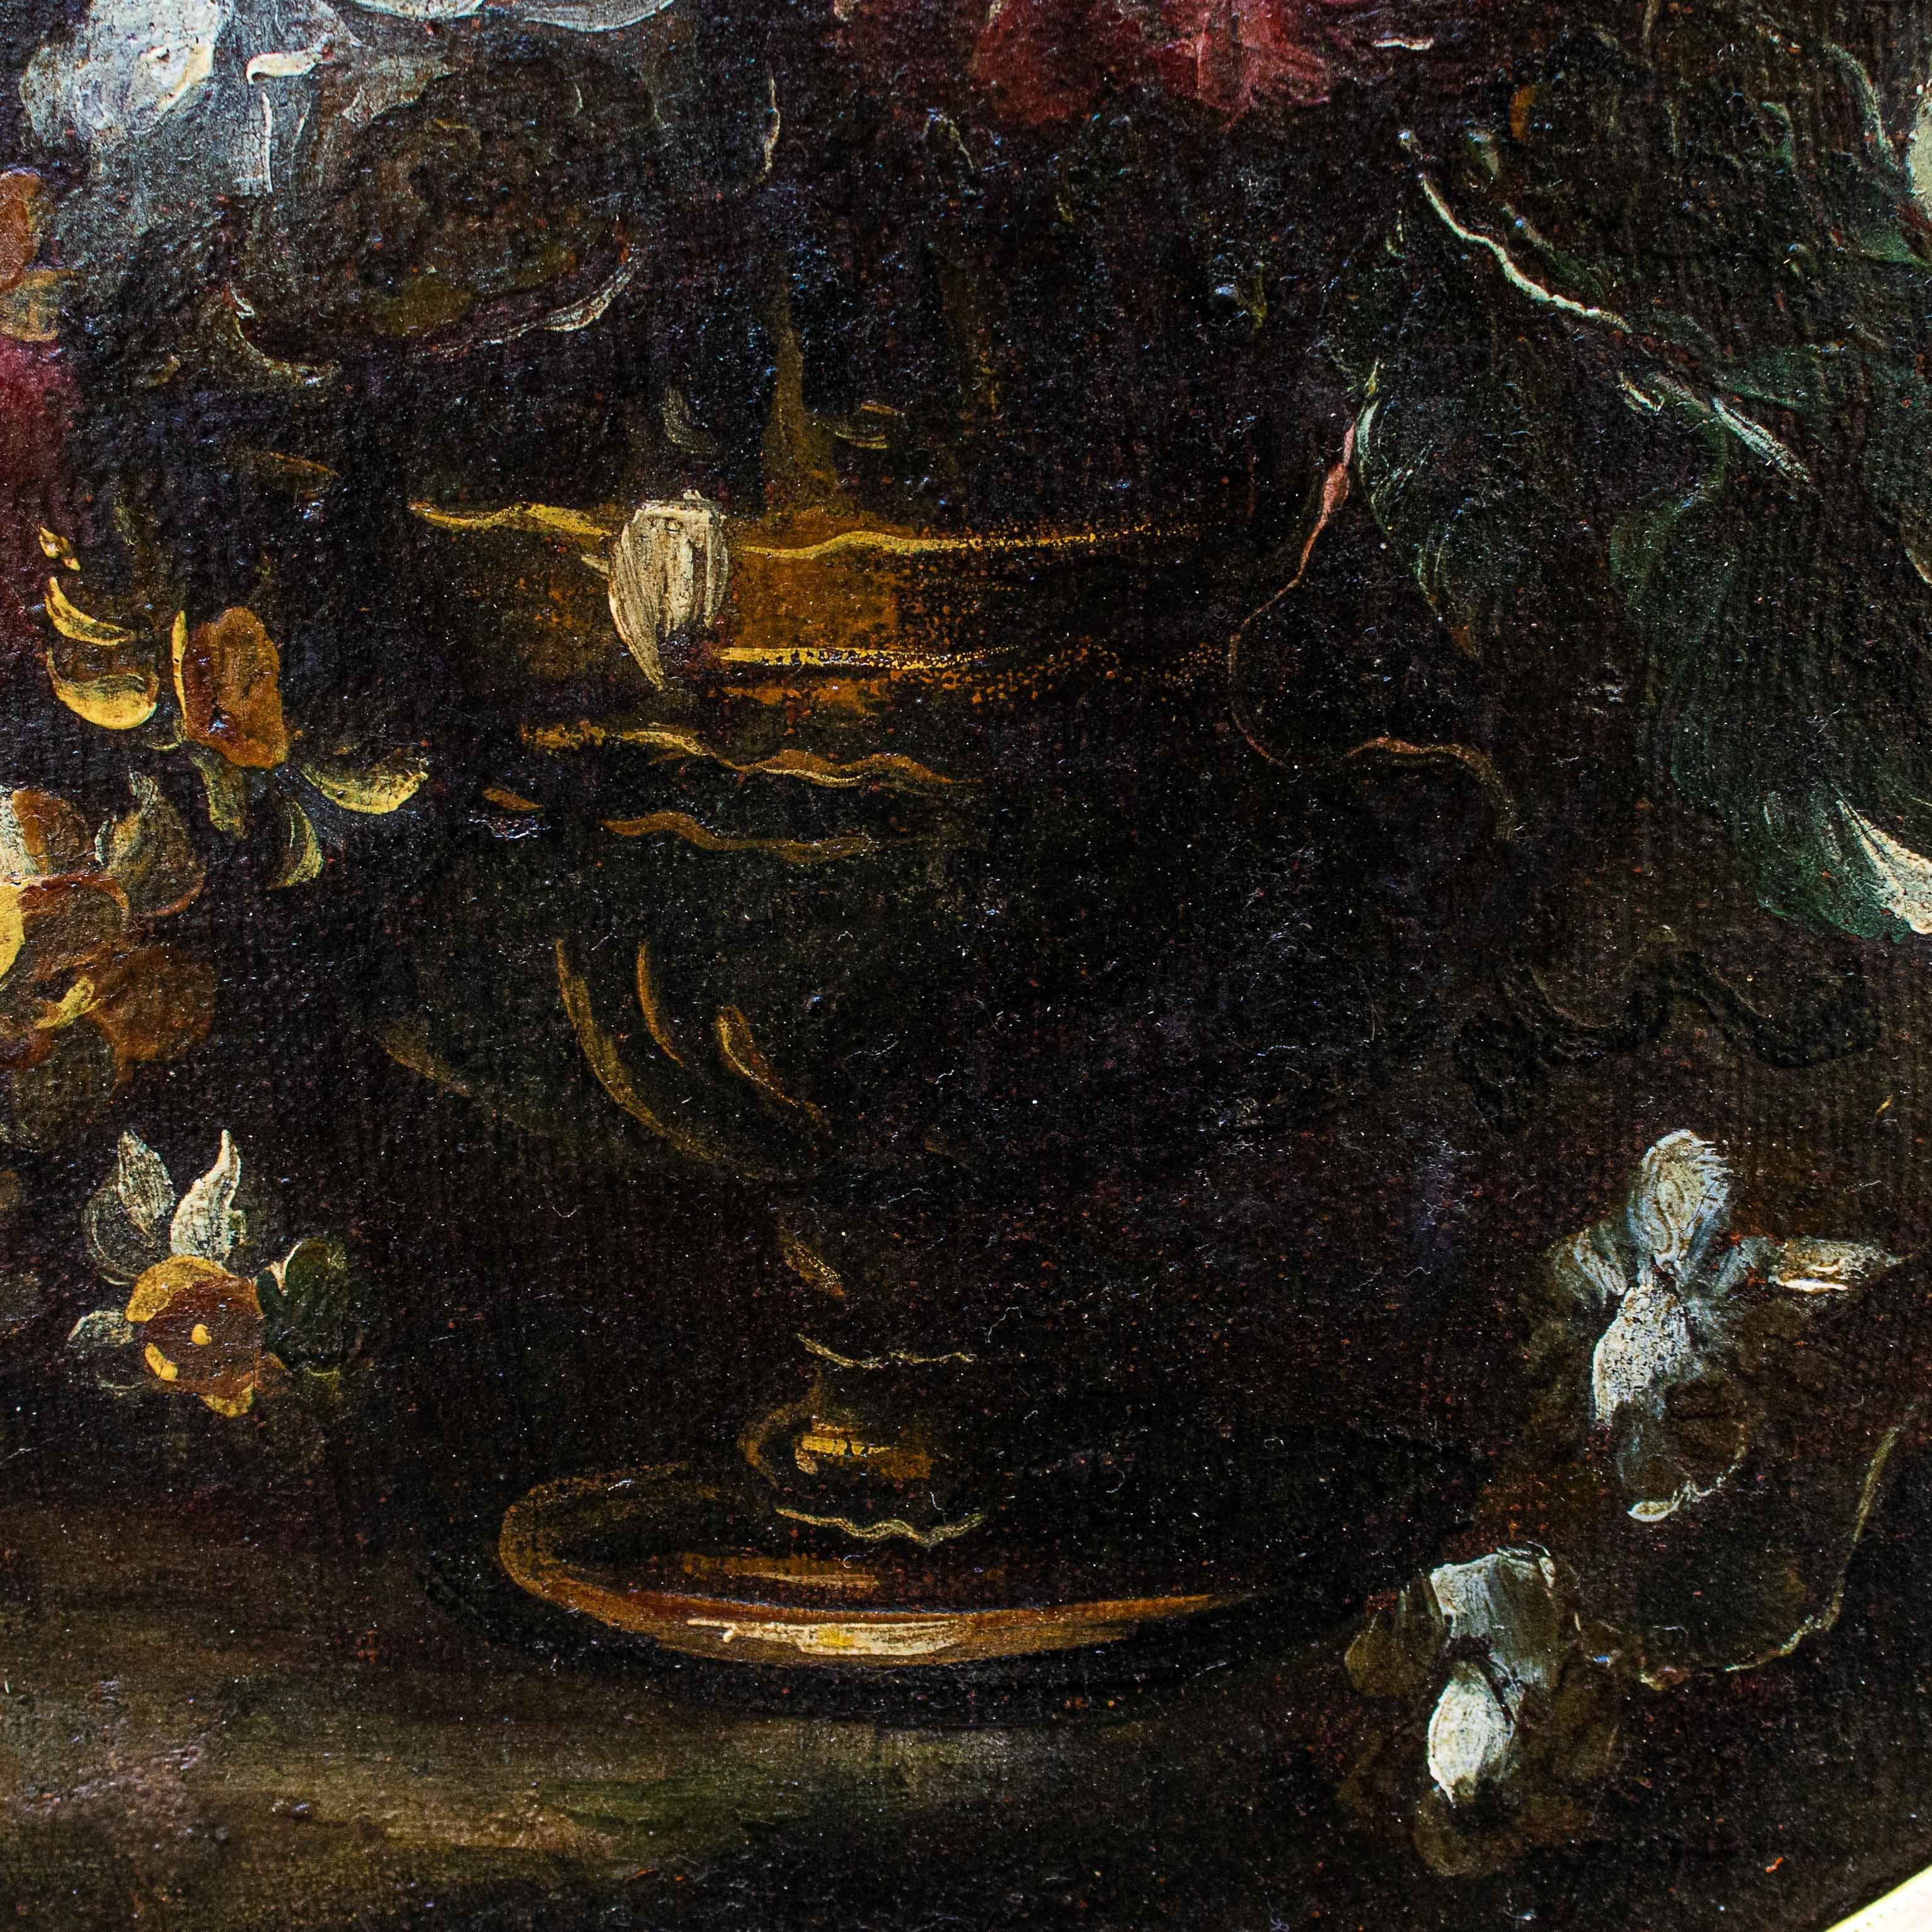 17th Century Still Lifes with Flowers Paintings Oil on Canvas 4